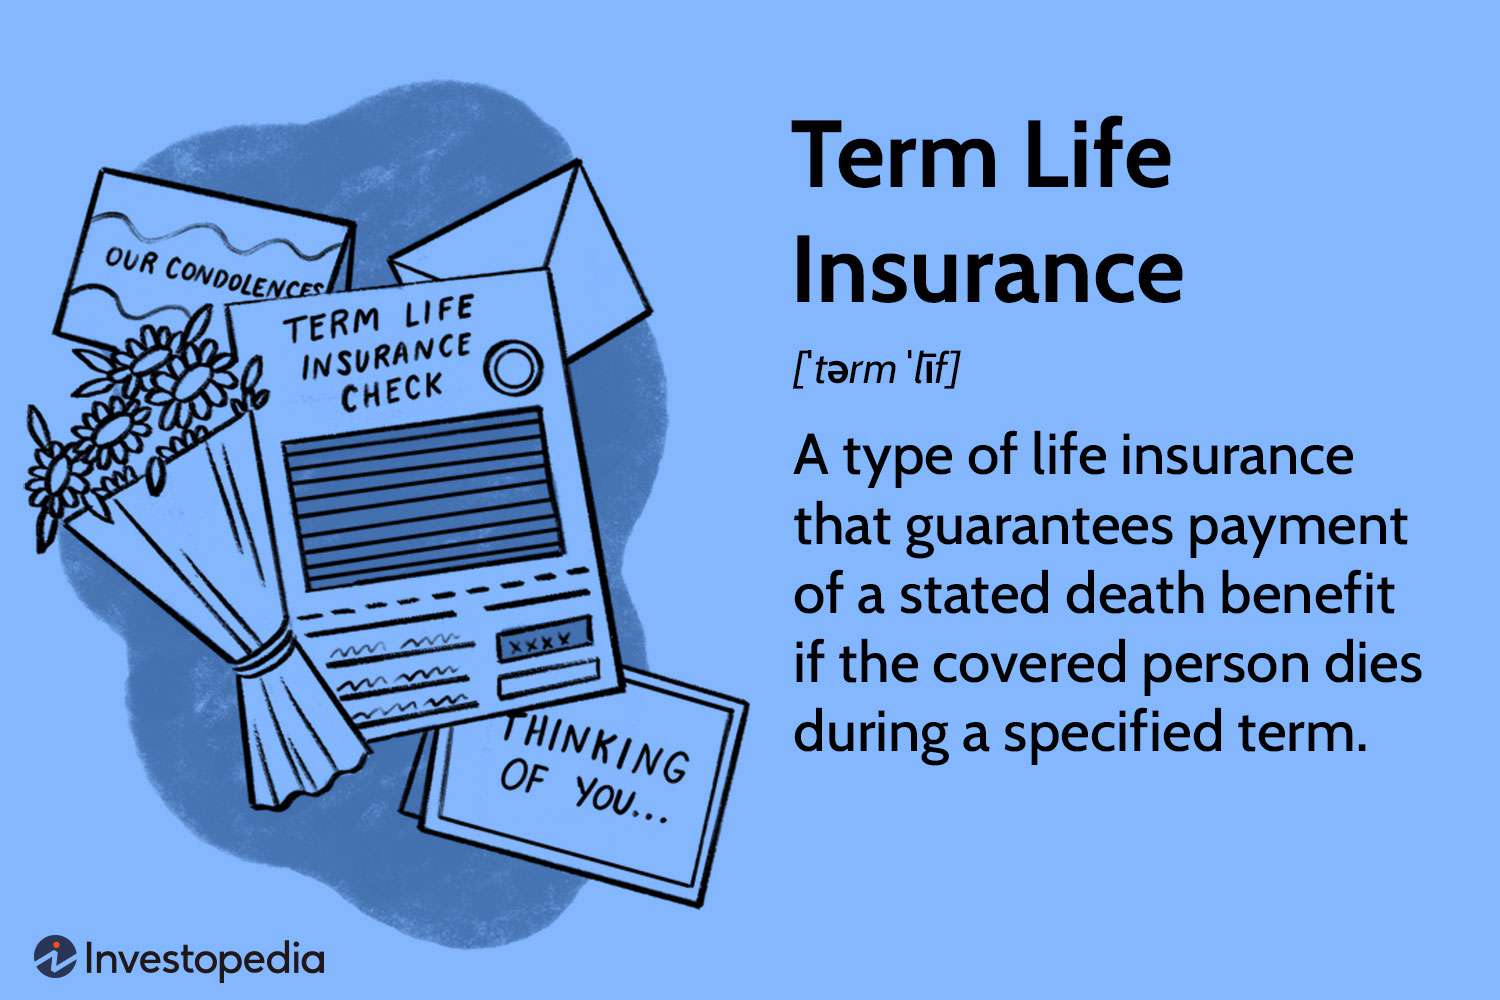 what is term life insurance?